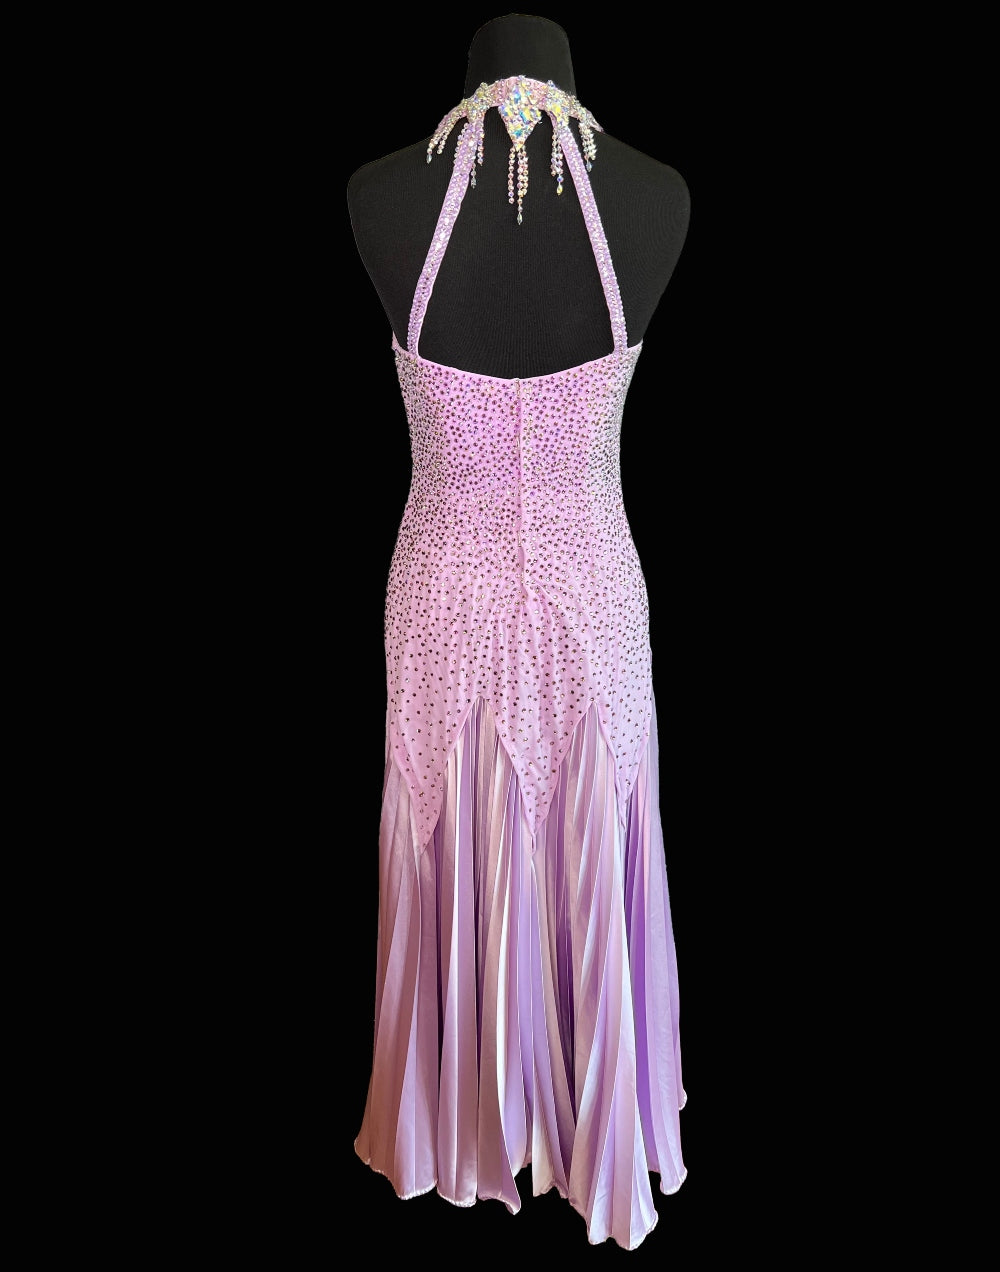 Resale Artistry in Motion Lilac Halter Neck Ballroom Dress with Pleated Skirt and Grecian Style Front Sash Sz M Smo160